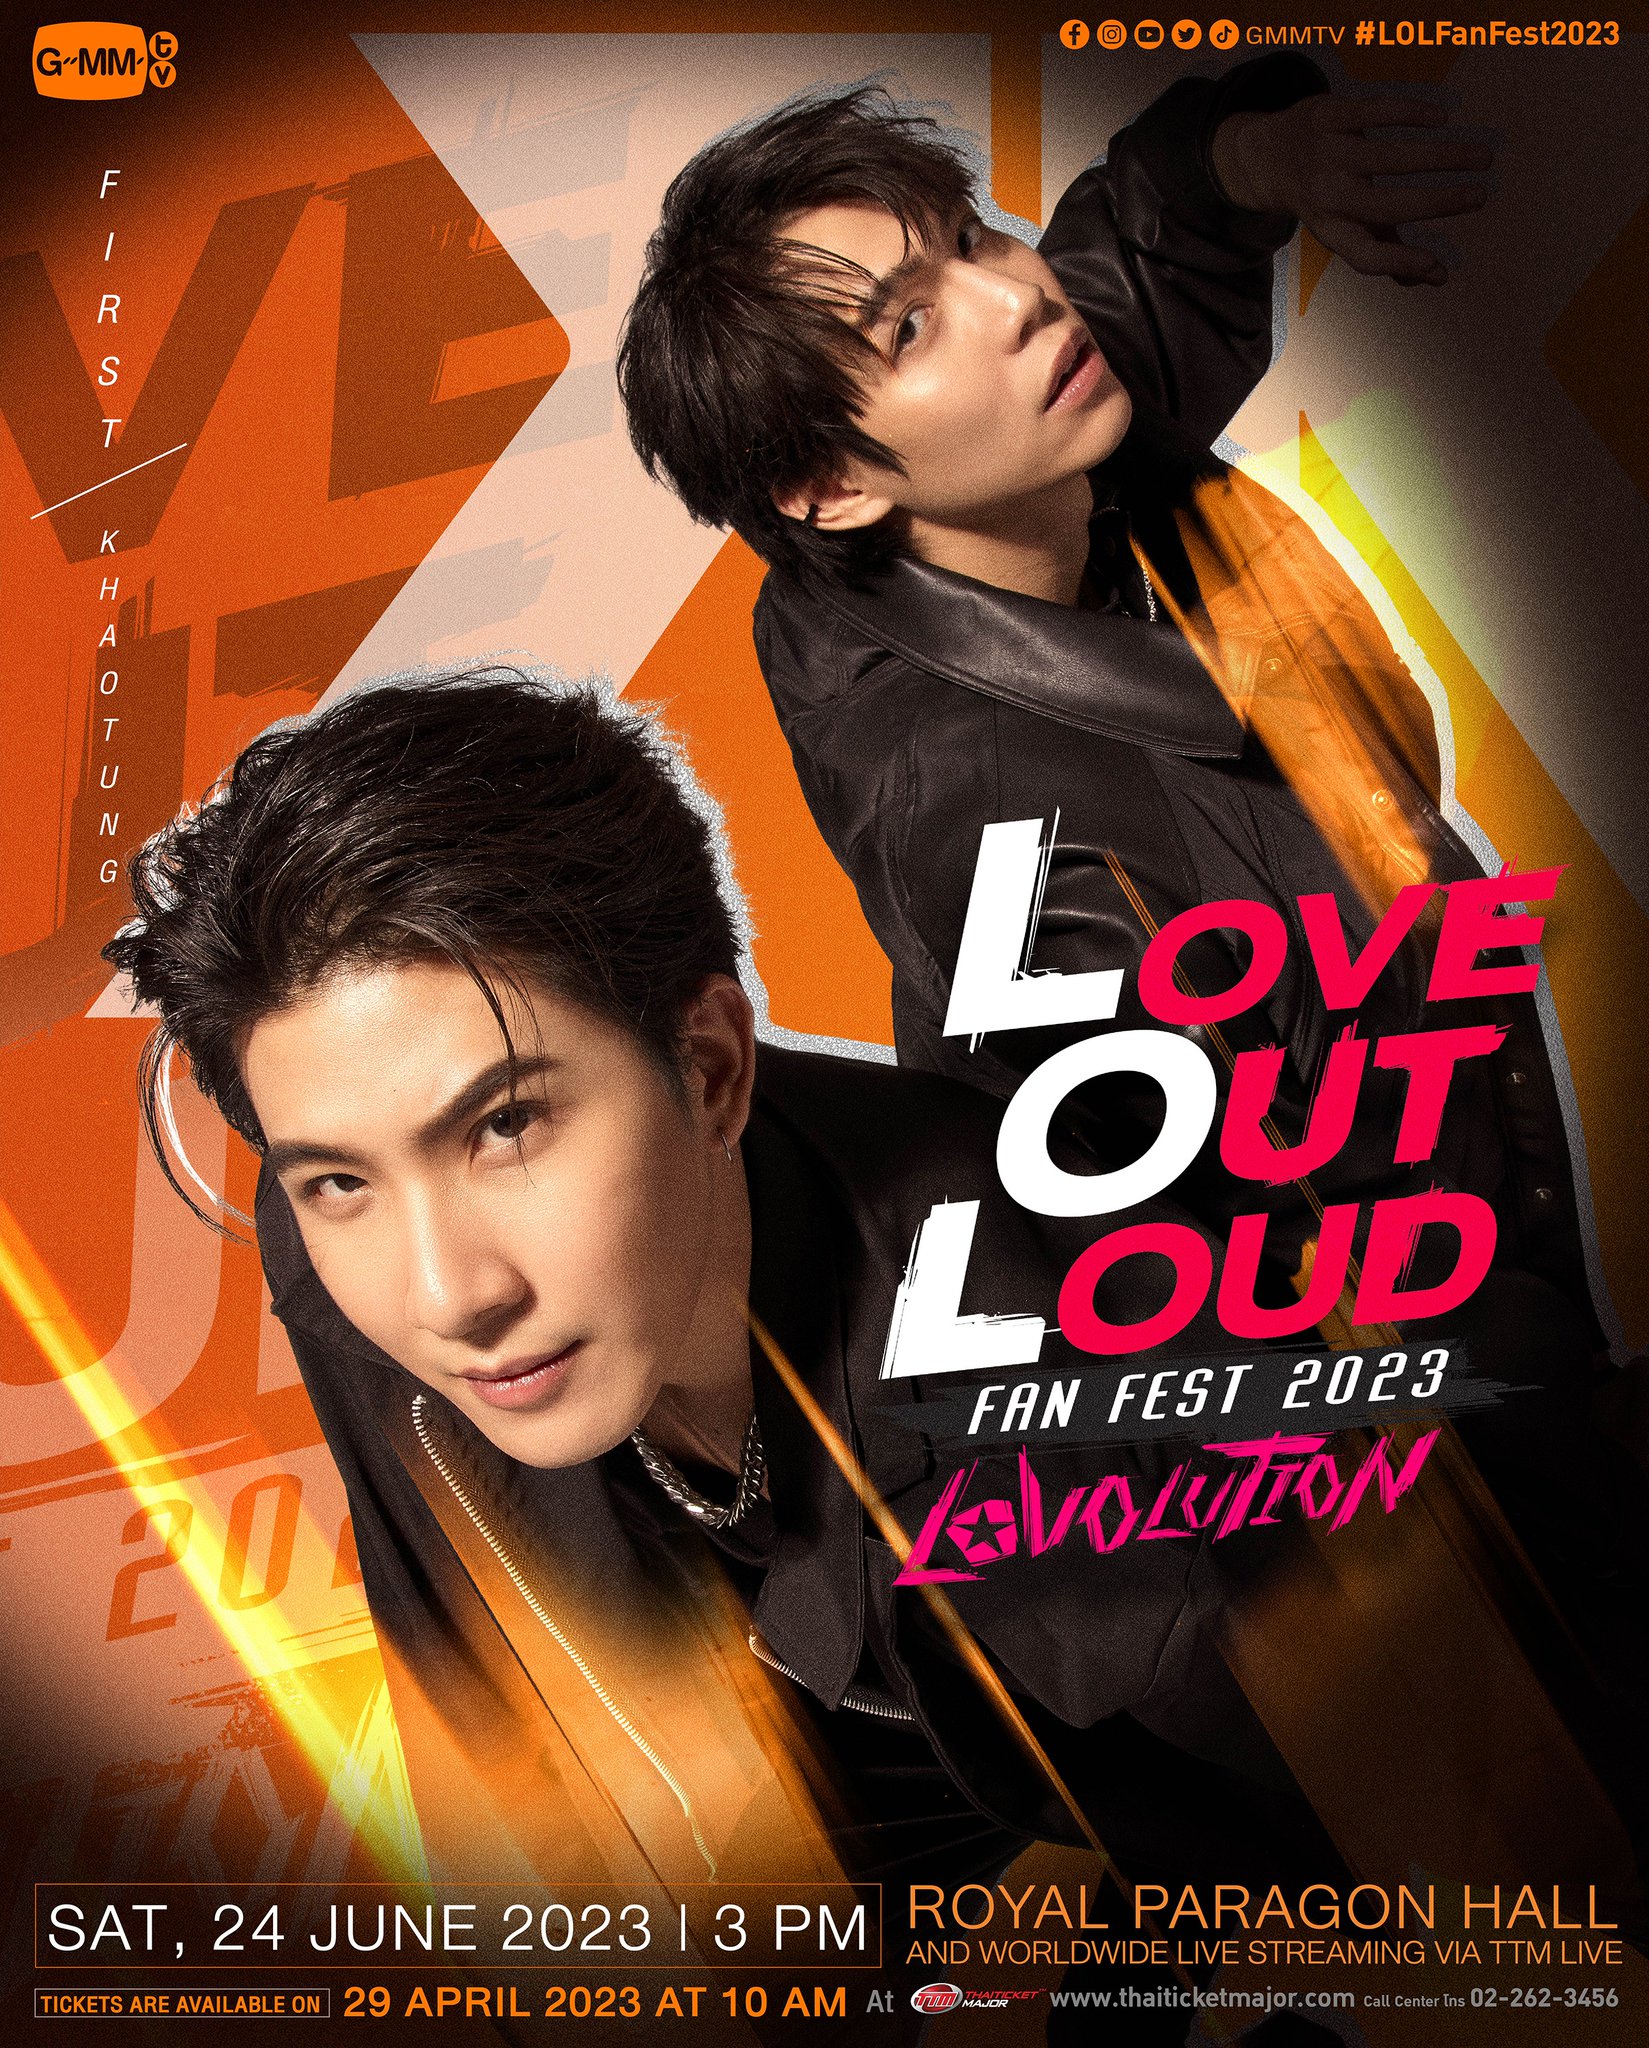 GMMTV on Twitter "‘FIRST KHAOTUNG’NREADY FORNLOVE OUT LOUD FAN